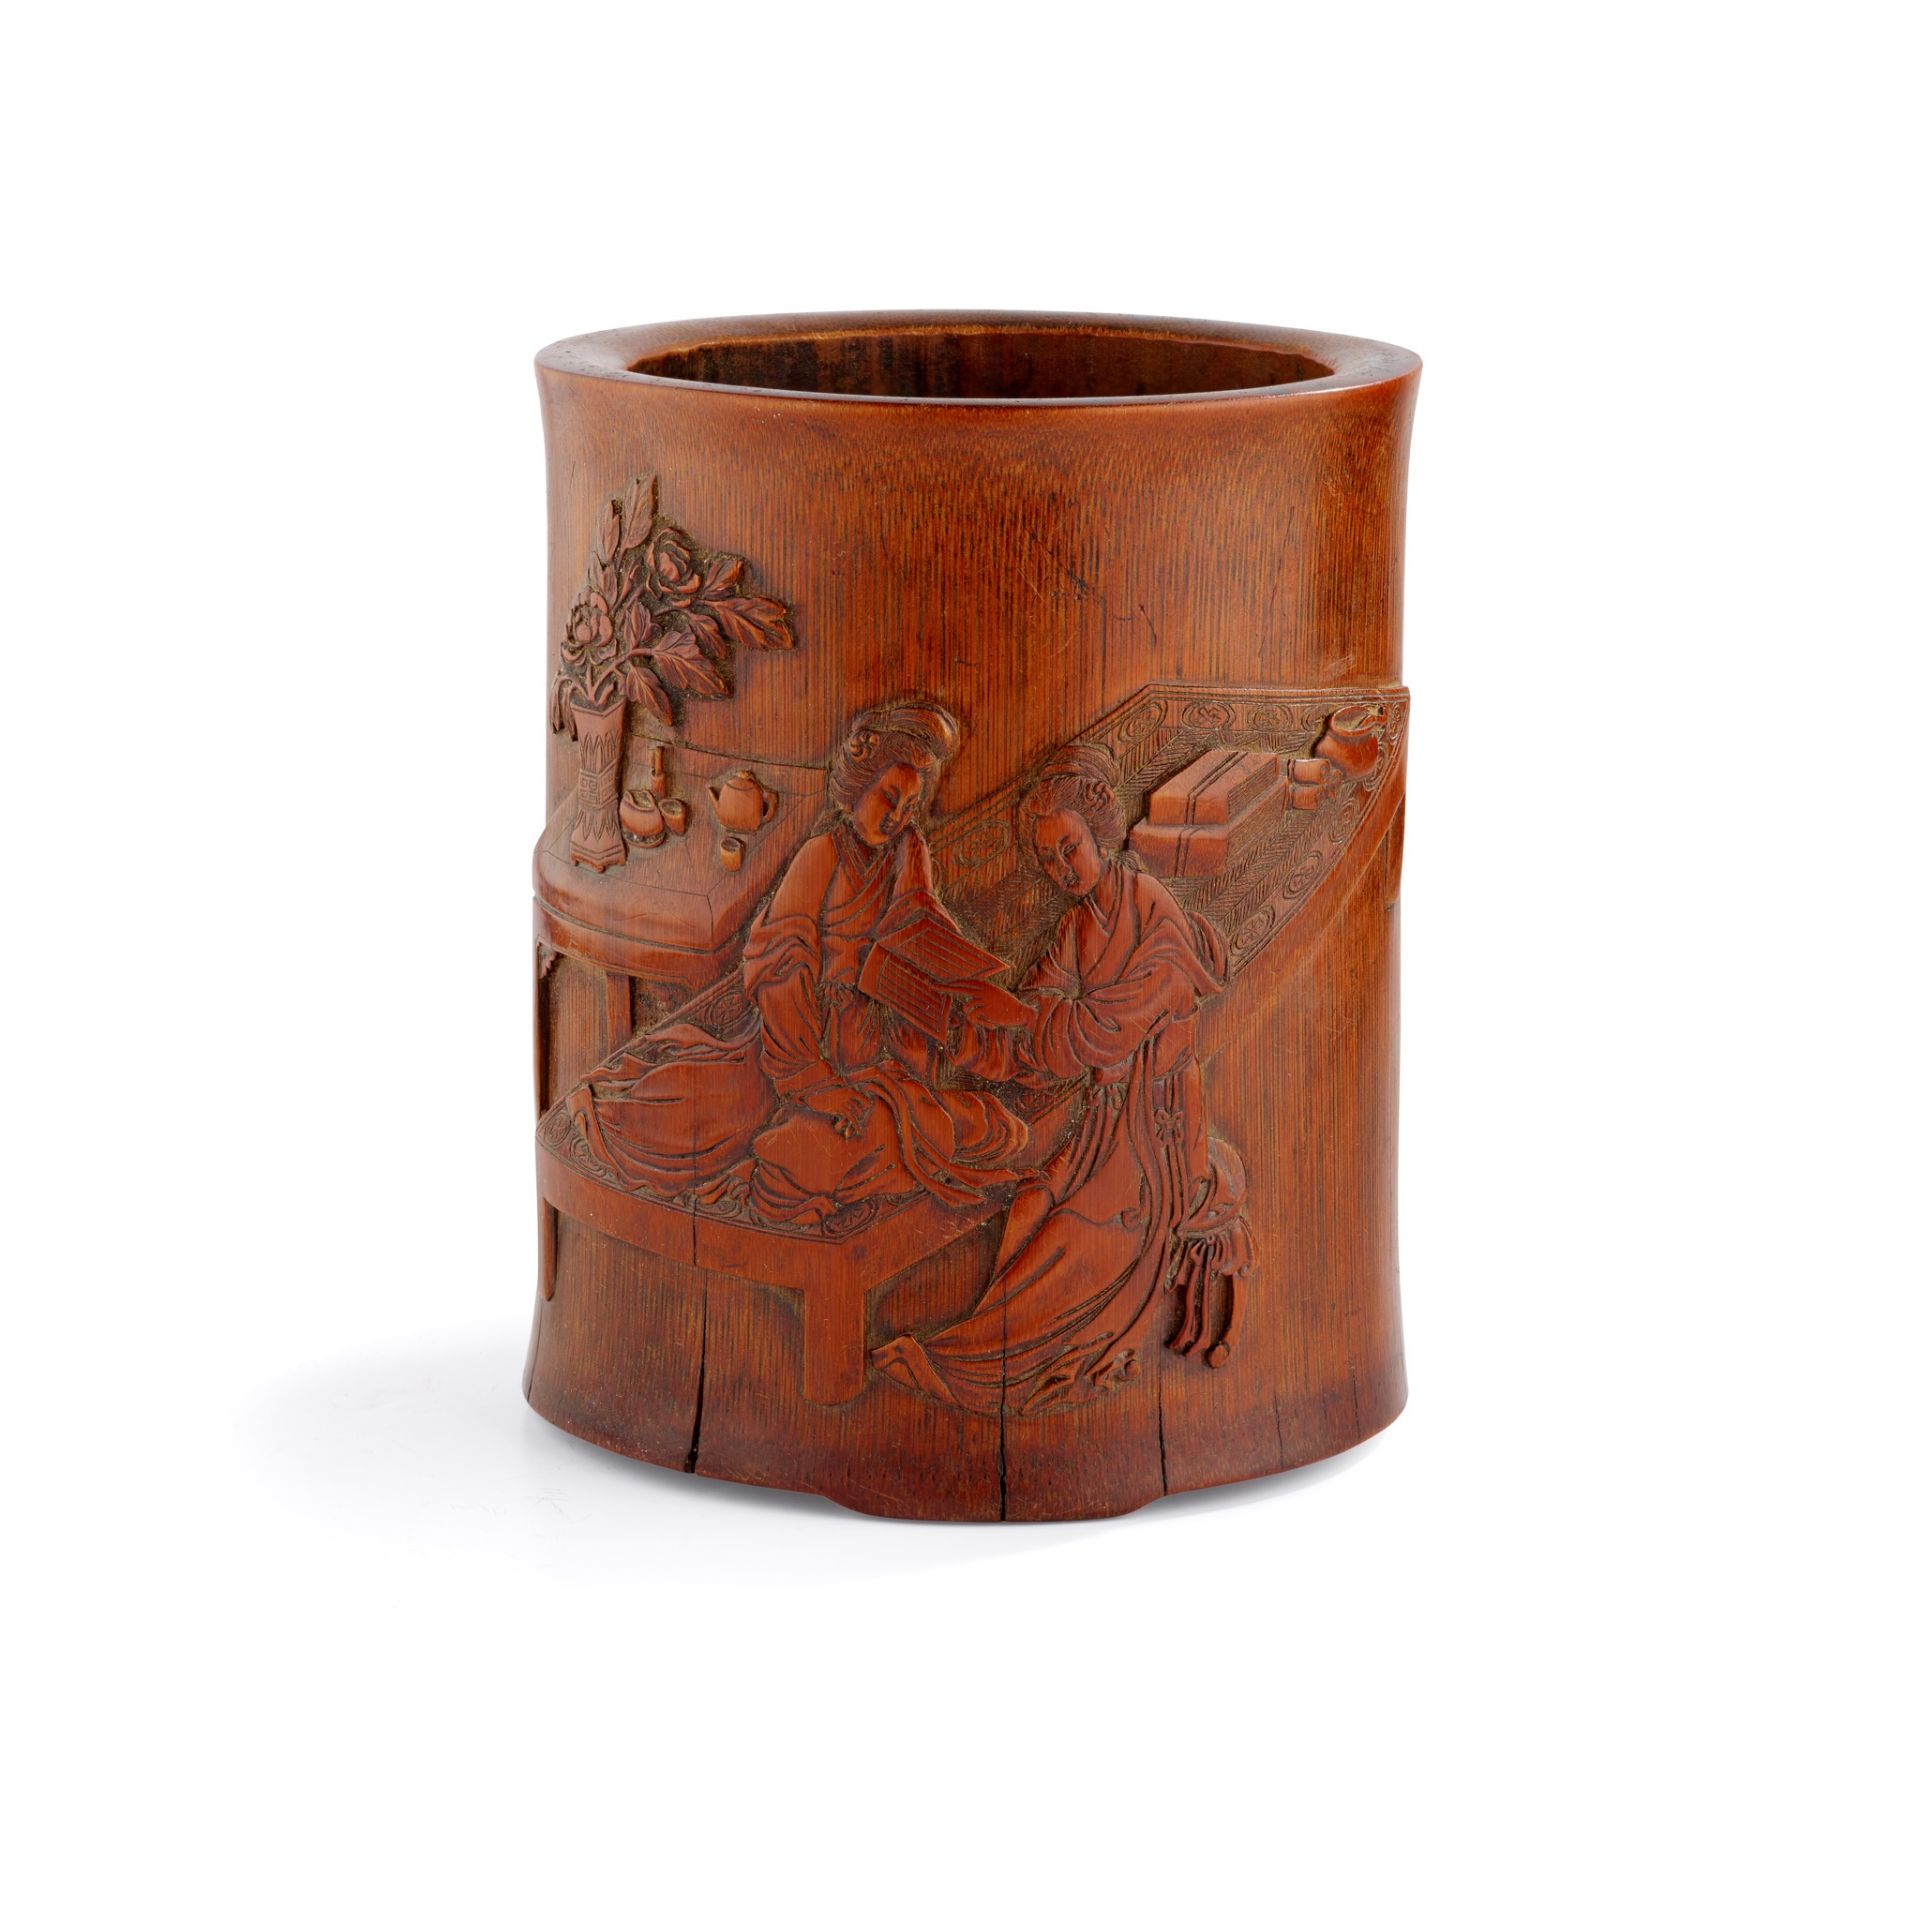 CARVED BAMBOO 'LADIES IN STUDY' BRUSH POT QING DYNASTY, 19TH CENTURY